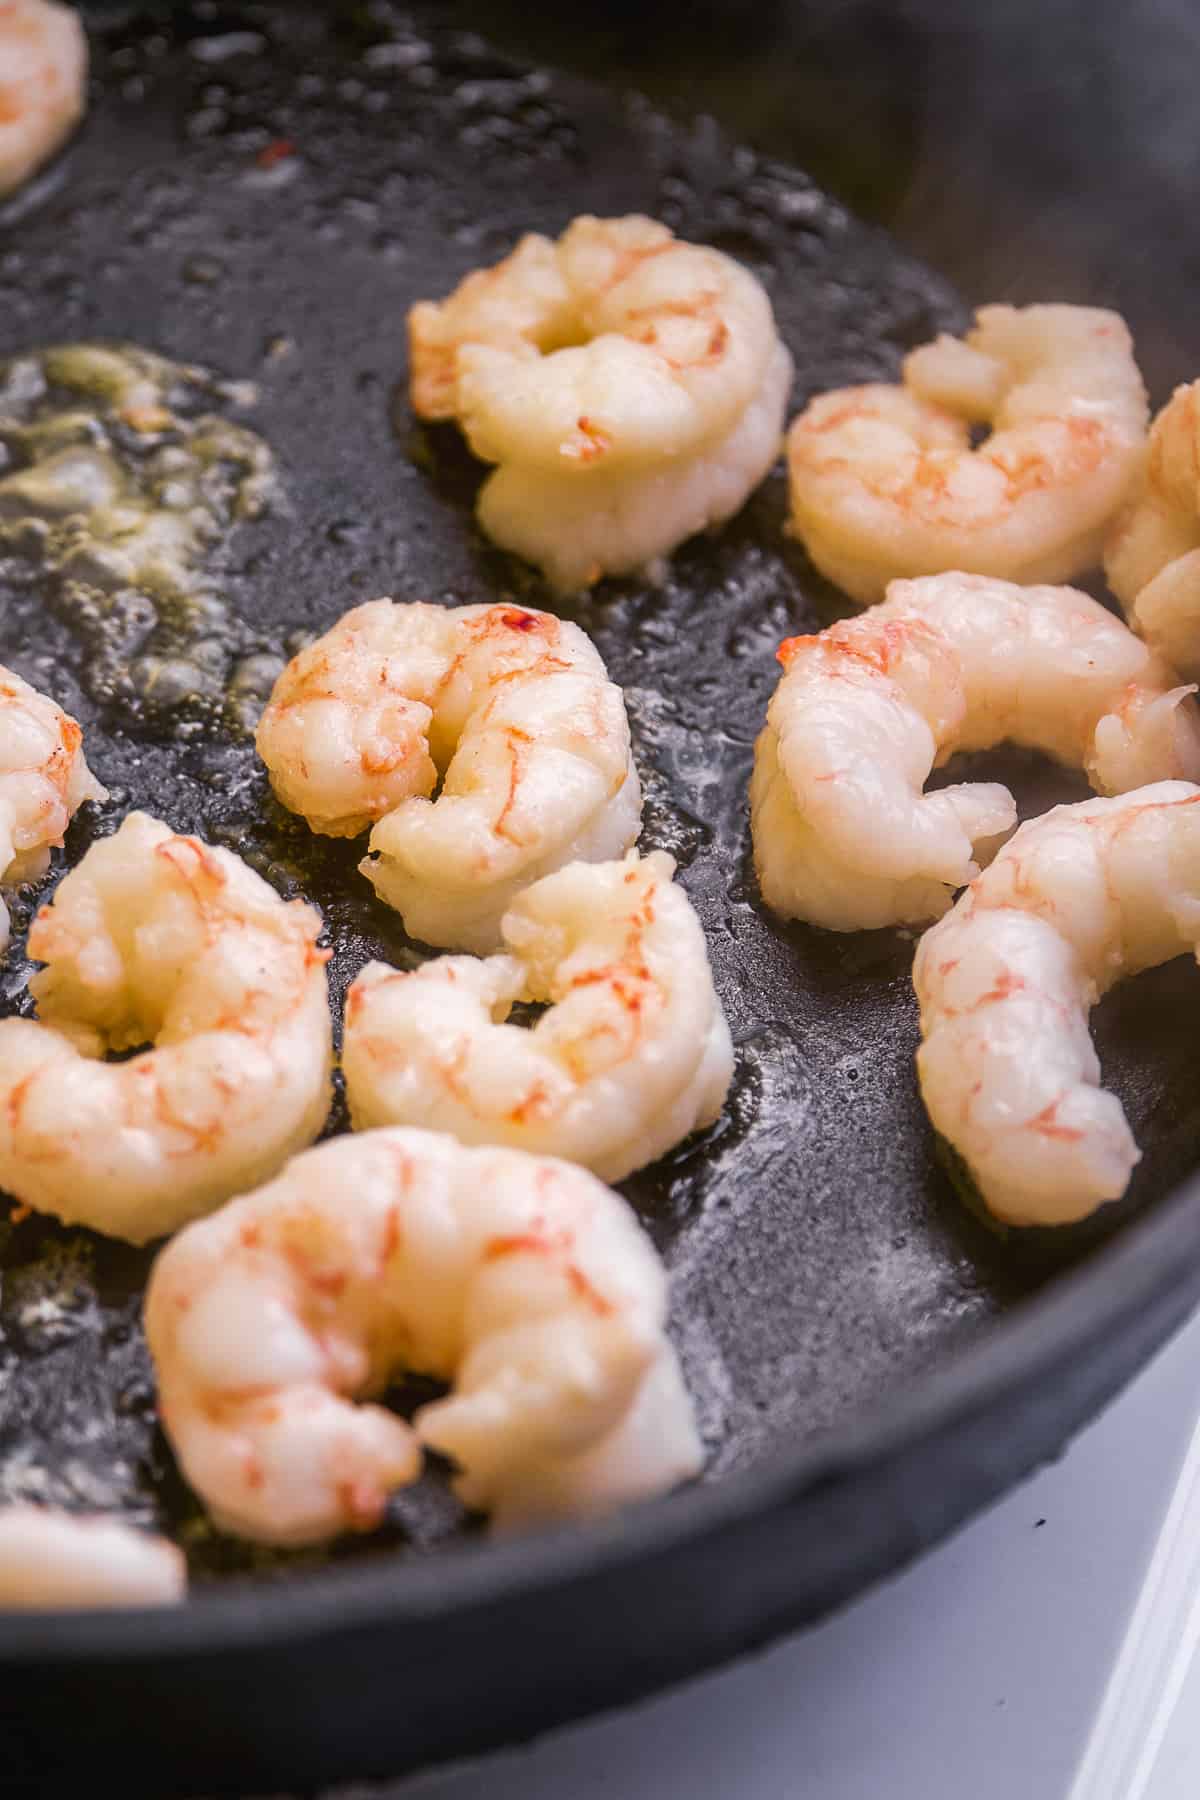 Shrimp being cooked in a black cast iron pan.